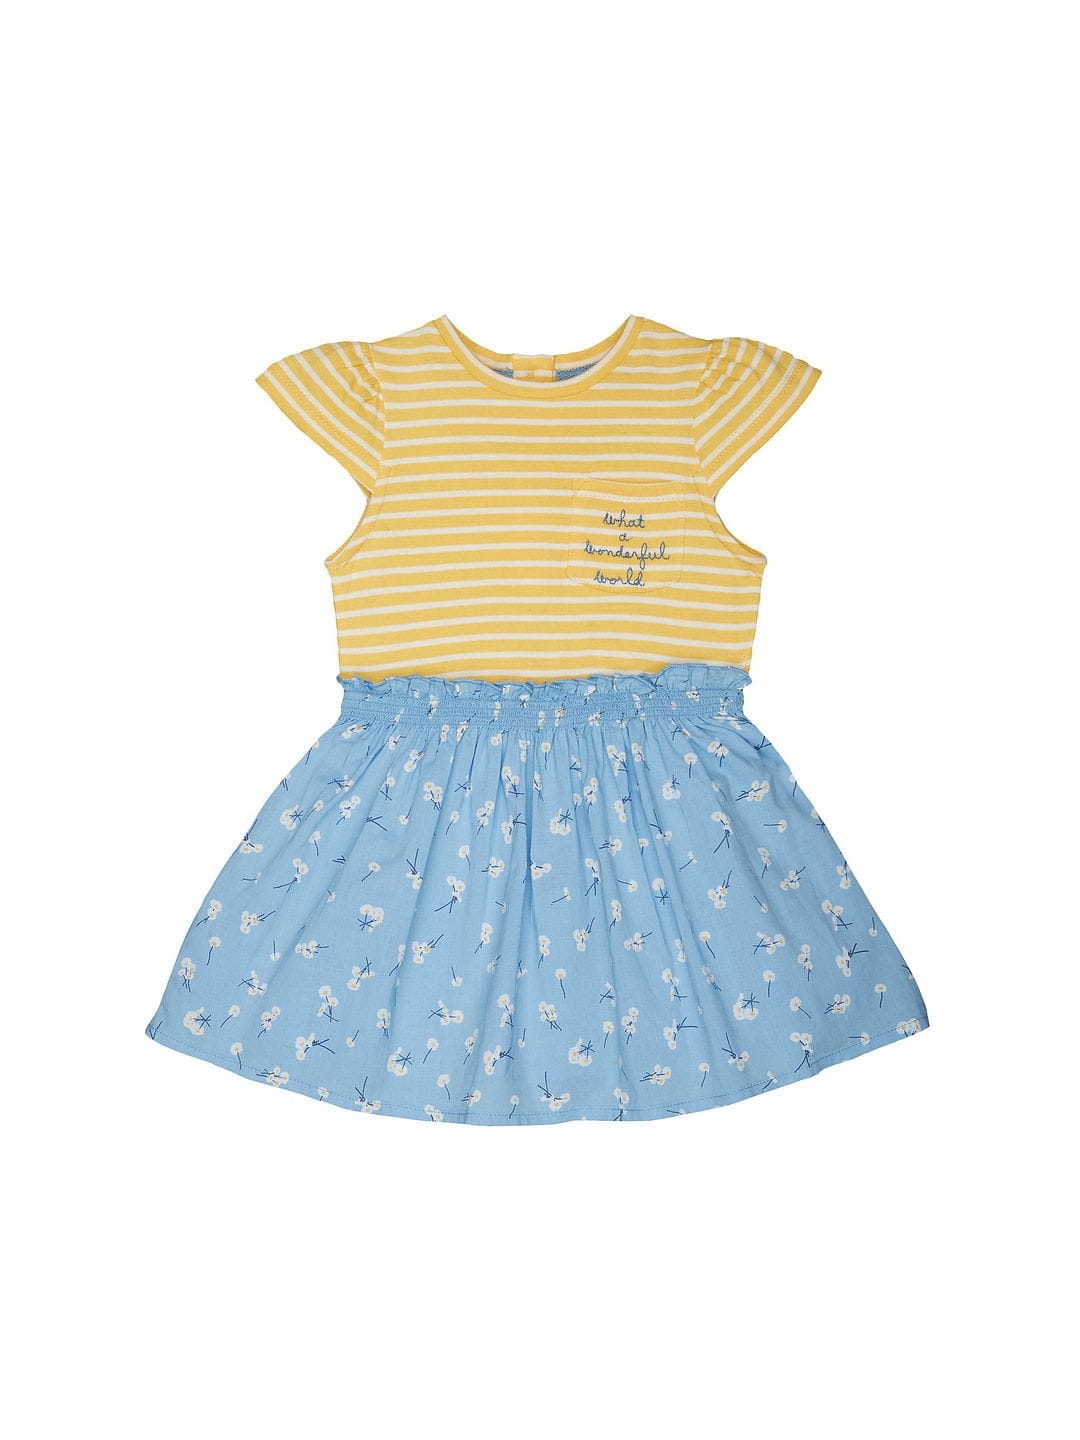 Mothercare | Yellow & Blue Striped Dress 0